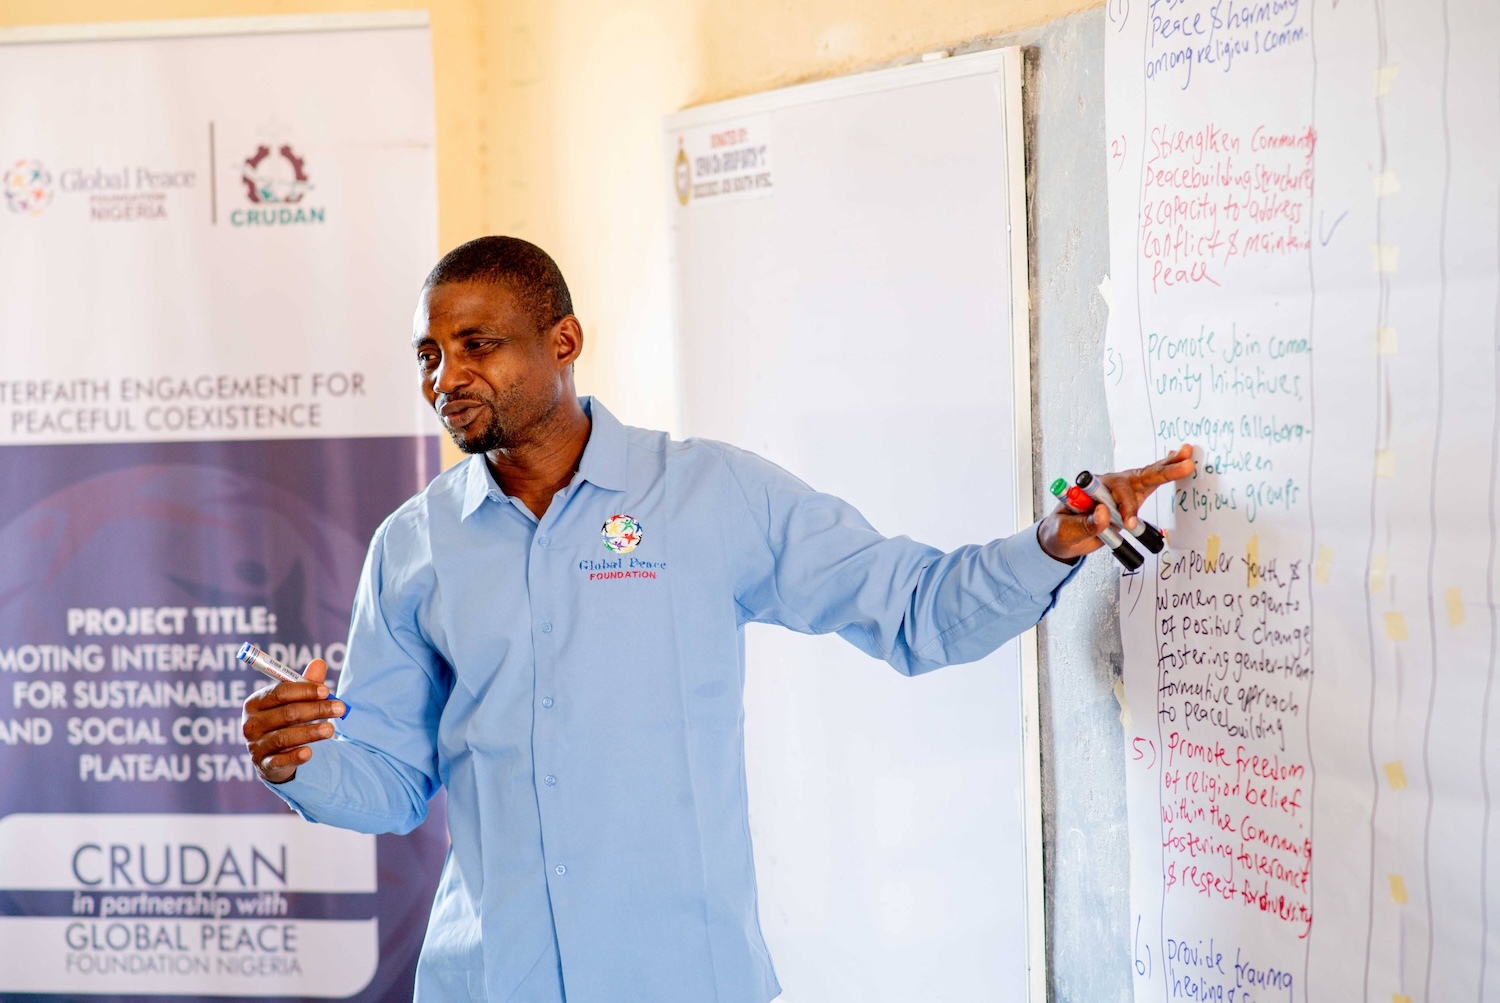 A man presenting at a workshop points to a flip chart with text about interfaith dialogue and sustainable peace.